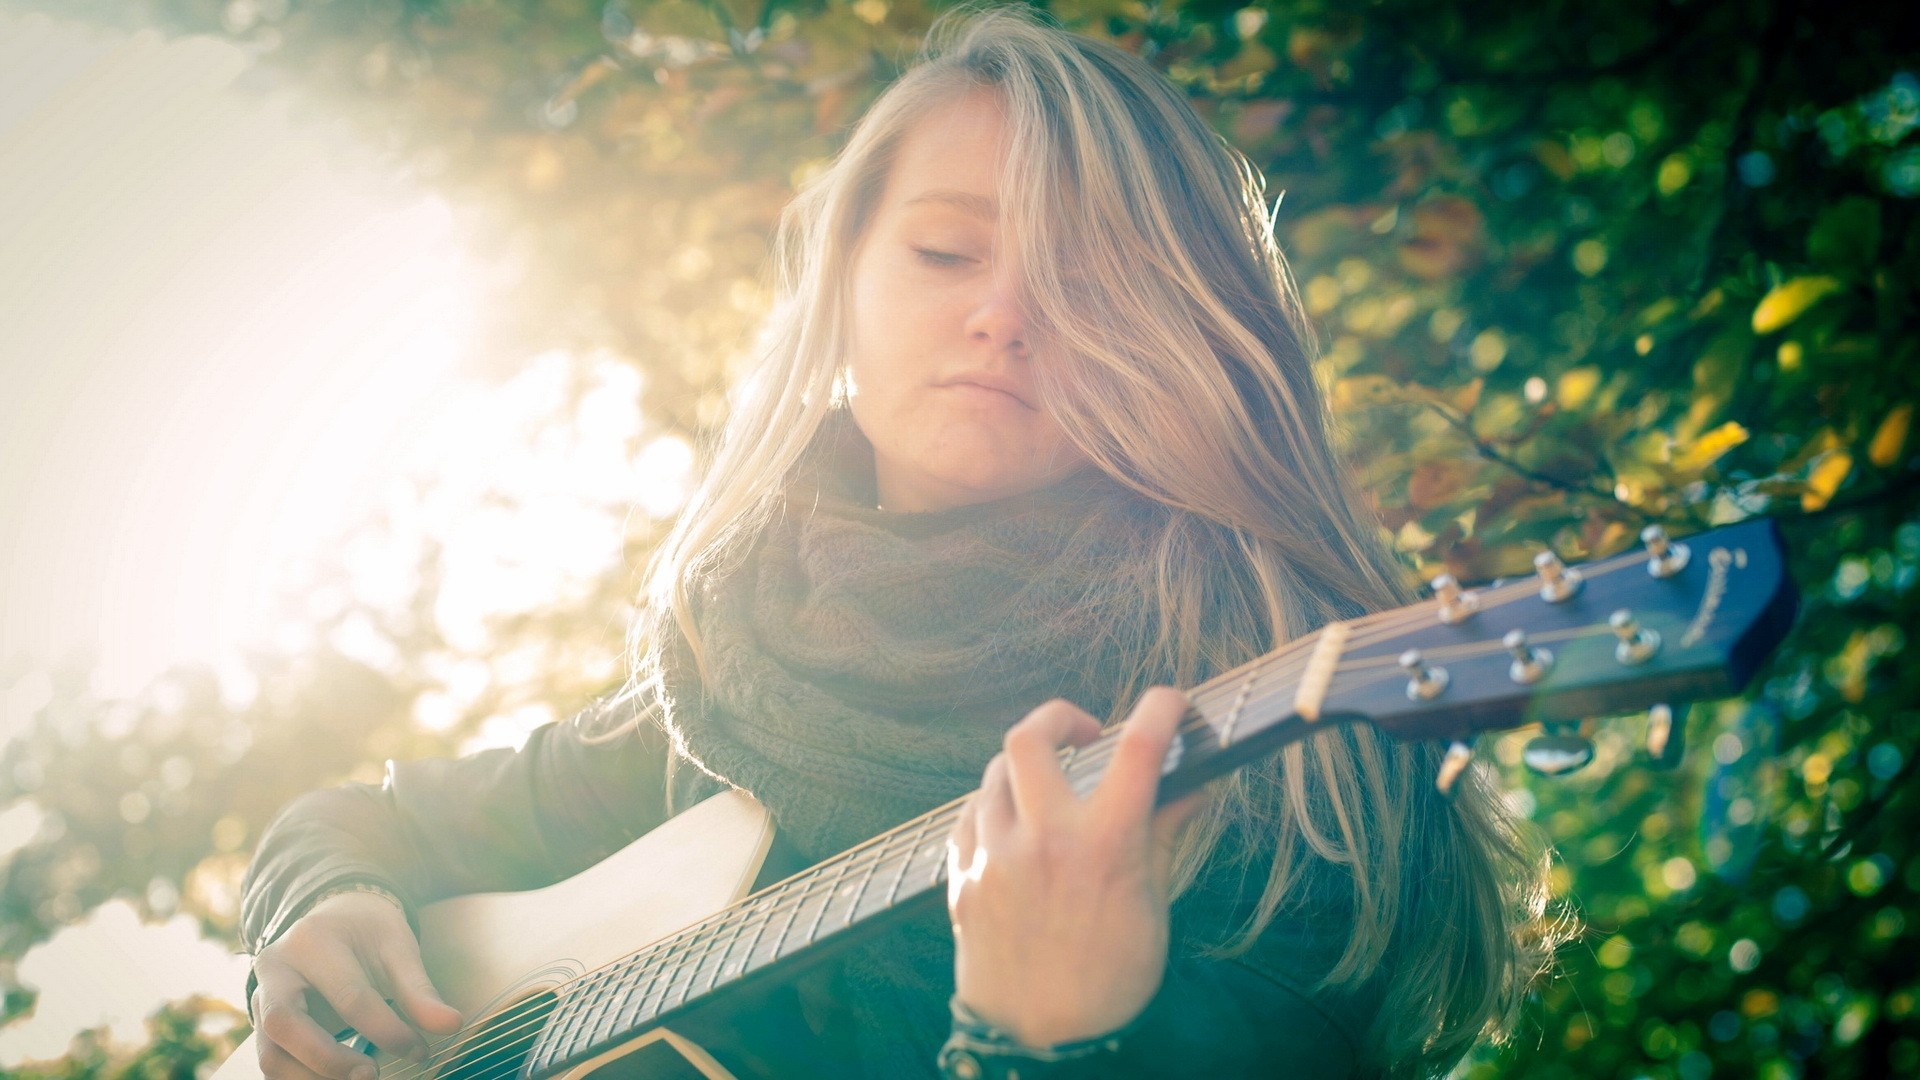 wallpaper of girl with guitar,people in nature,string instrument,guitar,musical instrument,plucked string instruments